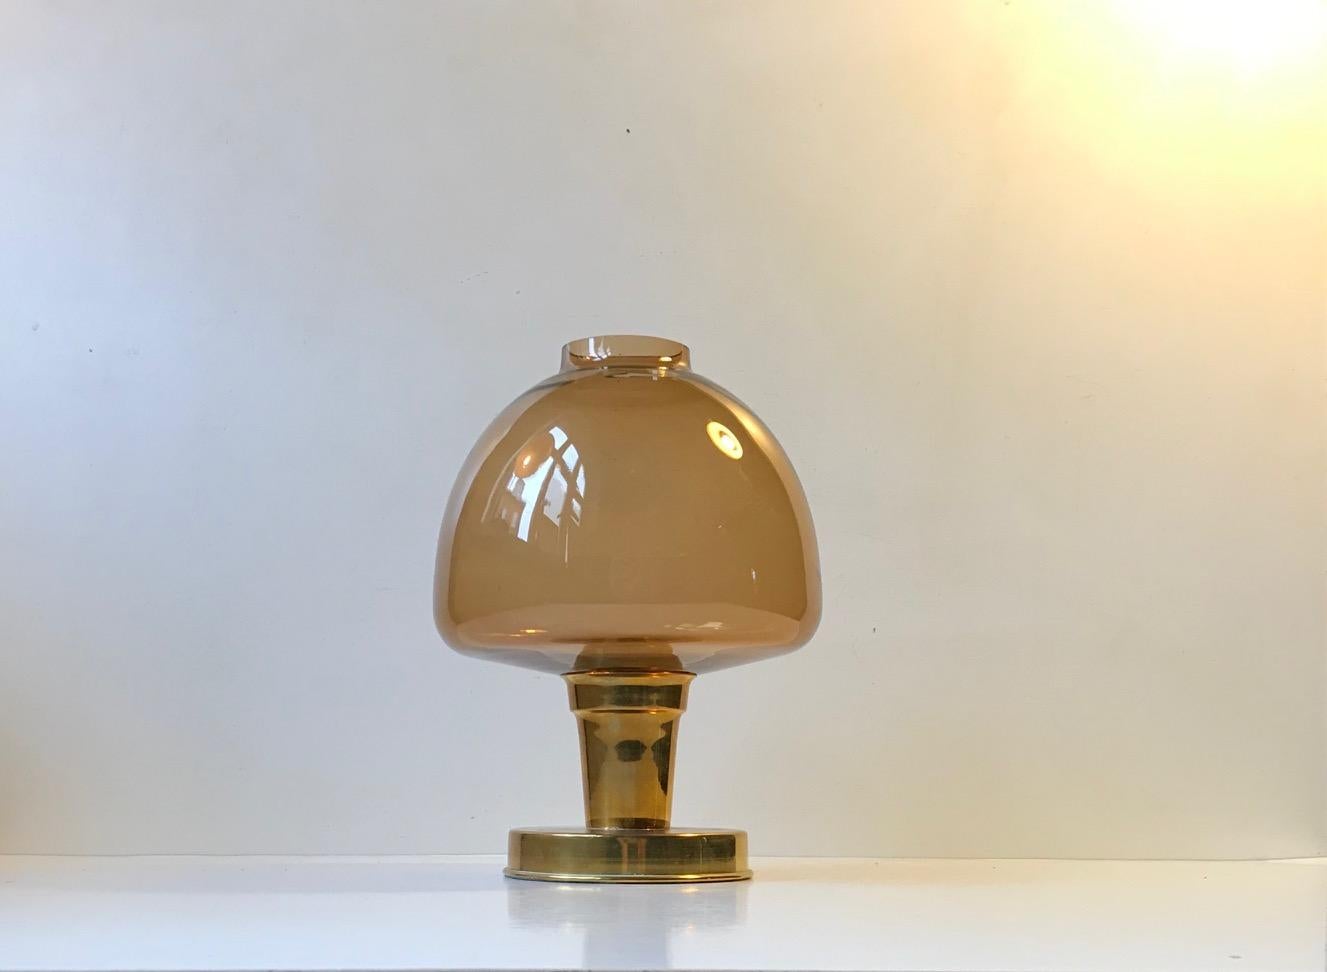 Candle lamp composed of patinated brass and brown toned smoke glass. Anonymous Scandinavian maker in the style of Hans Agne Jakobsson - Markaryd AB.